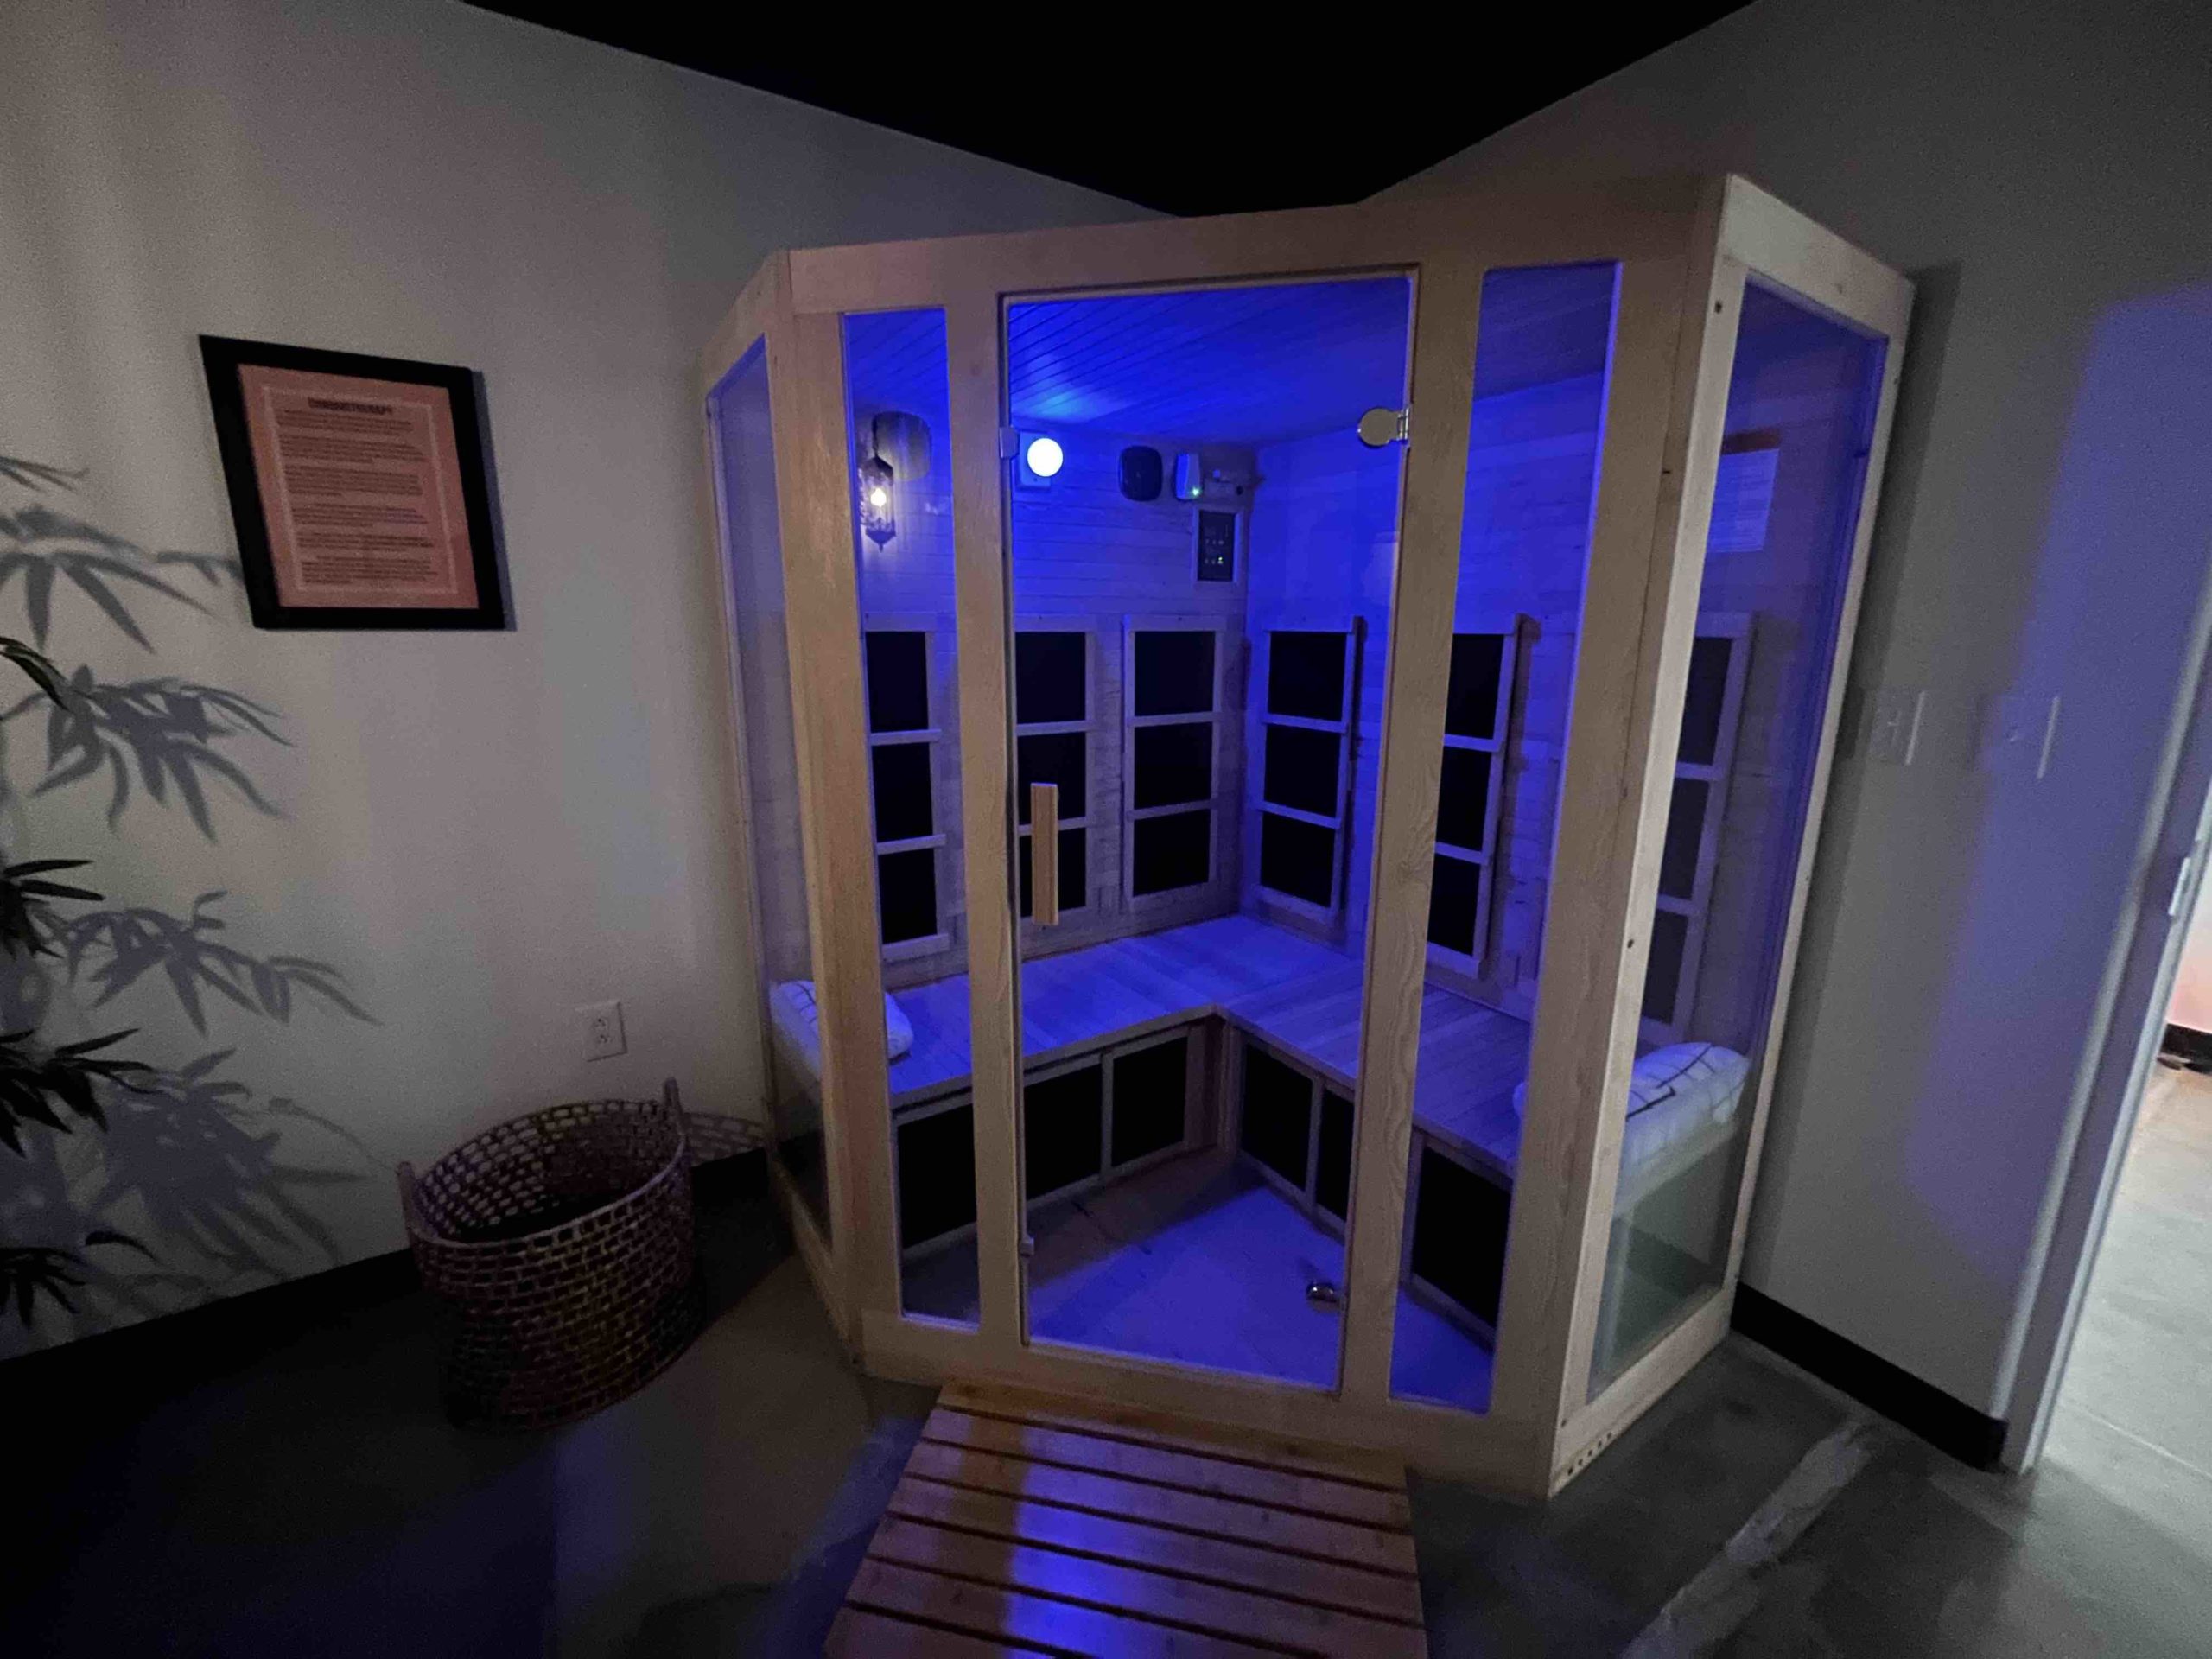 An infrared sauna at The Salt Cave provides a form of light therapy that may boost mood and energy levels. (Scott Albright/Neighborhood Journal)